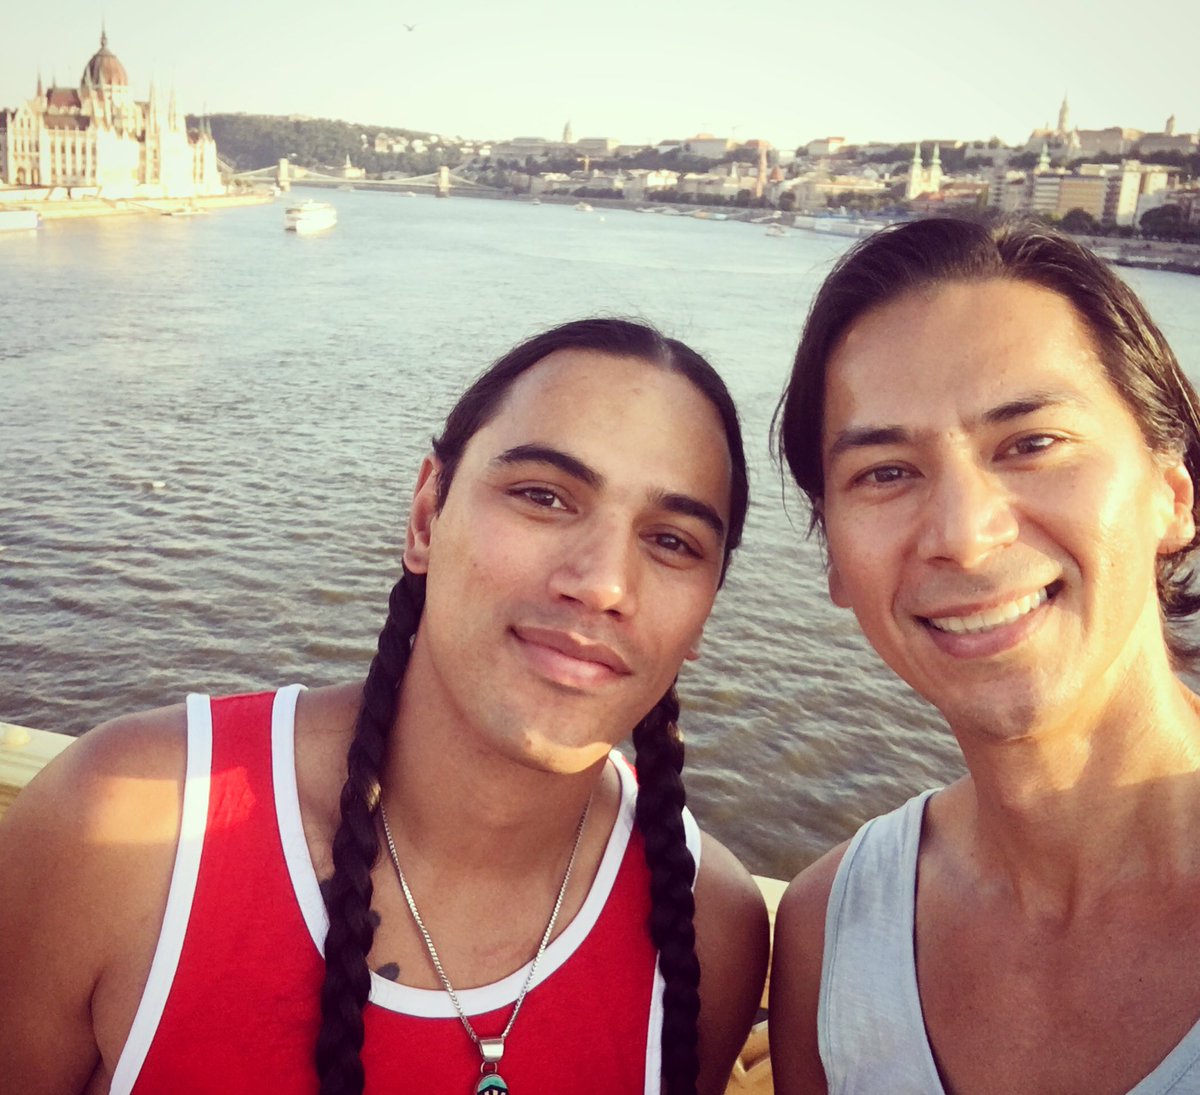 Hanging in #Budapest w/ #WillStrongheart again, but this time he's working on a DIFFERENT project #TheAlienist #NativesOnTv #NativesInEurope